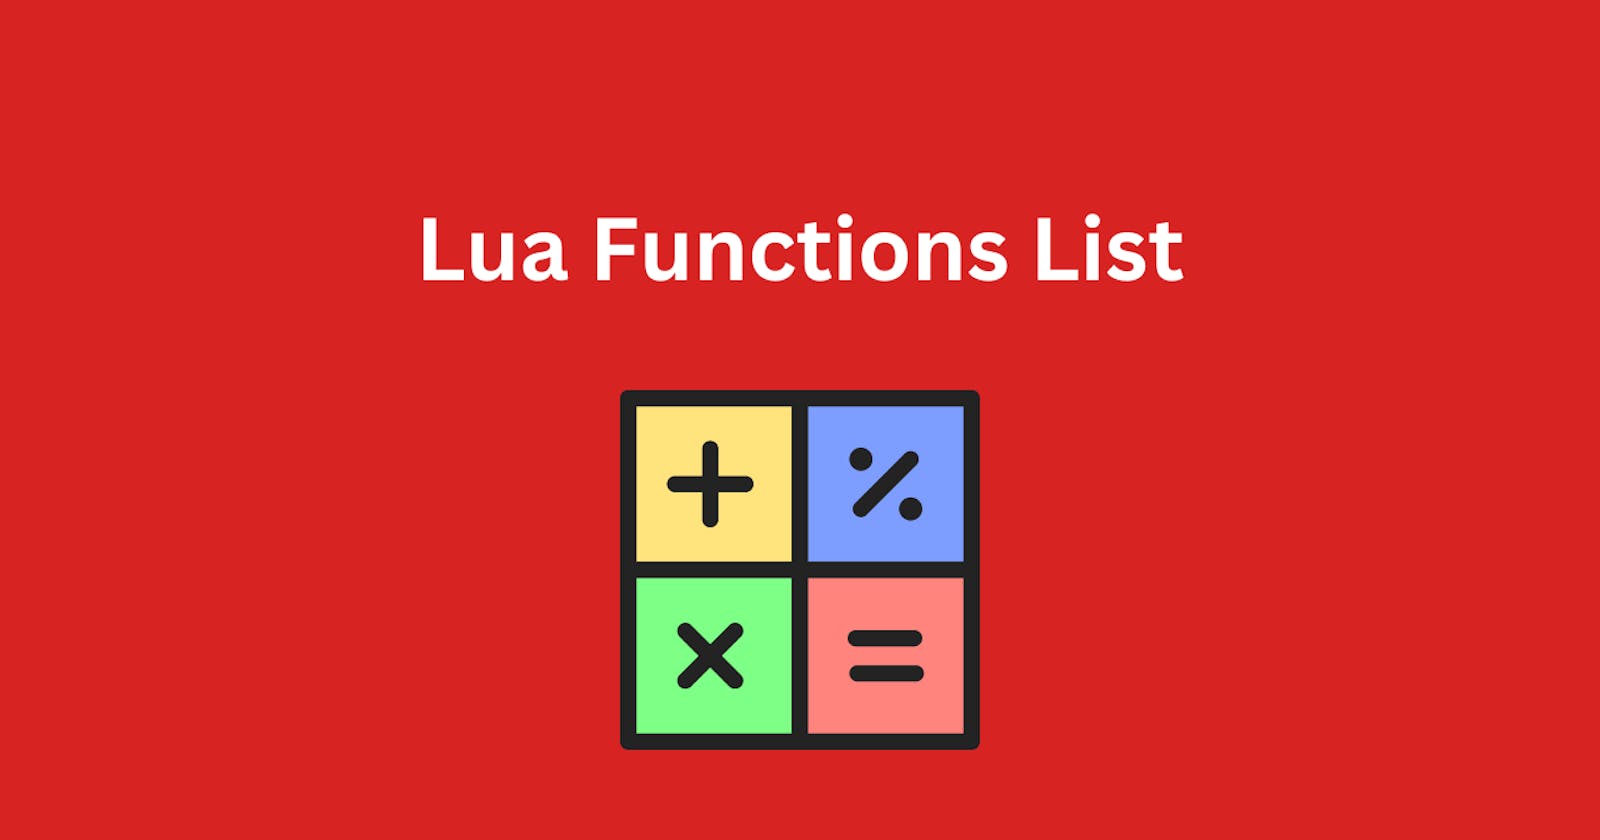 Introduction to Lua Functions List